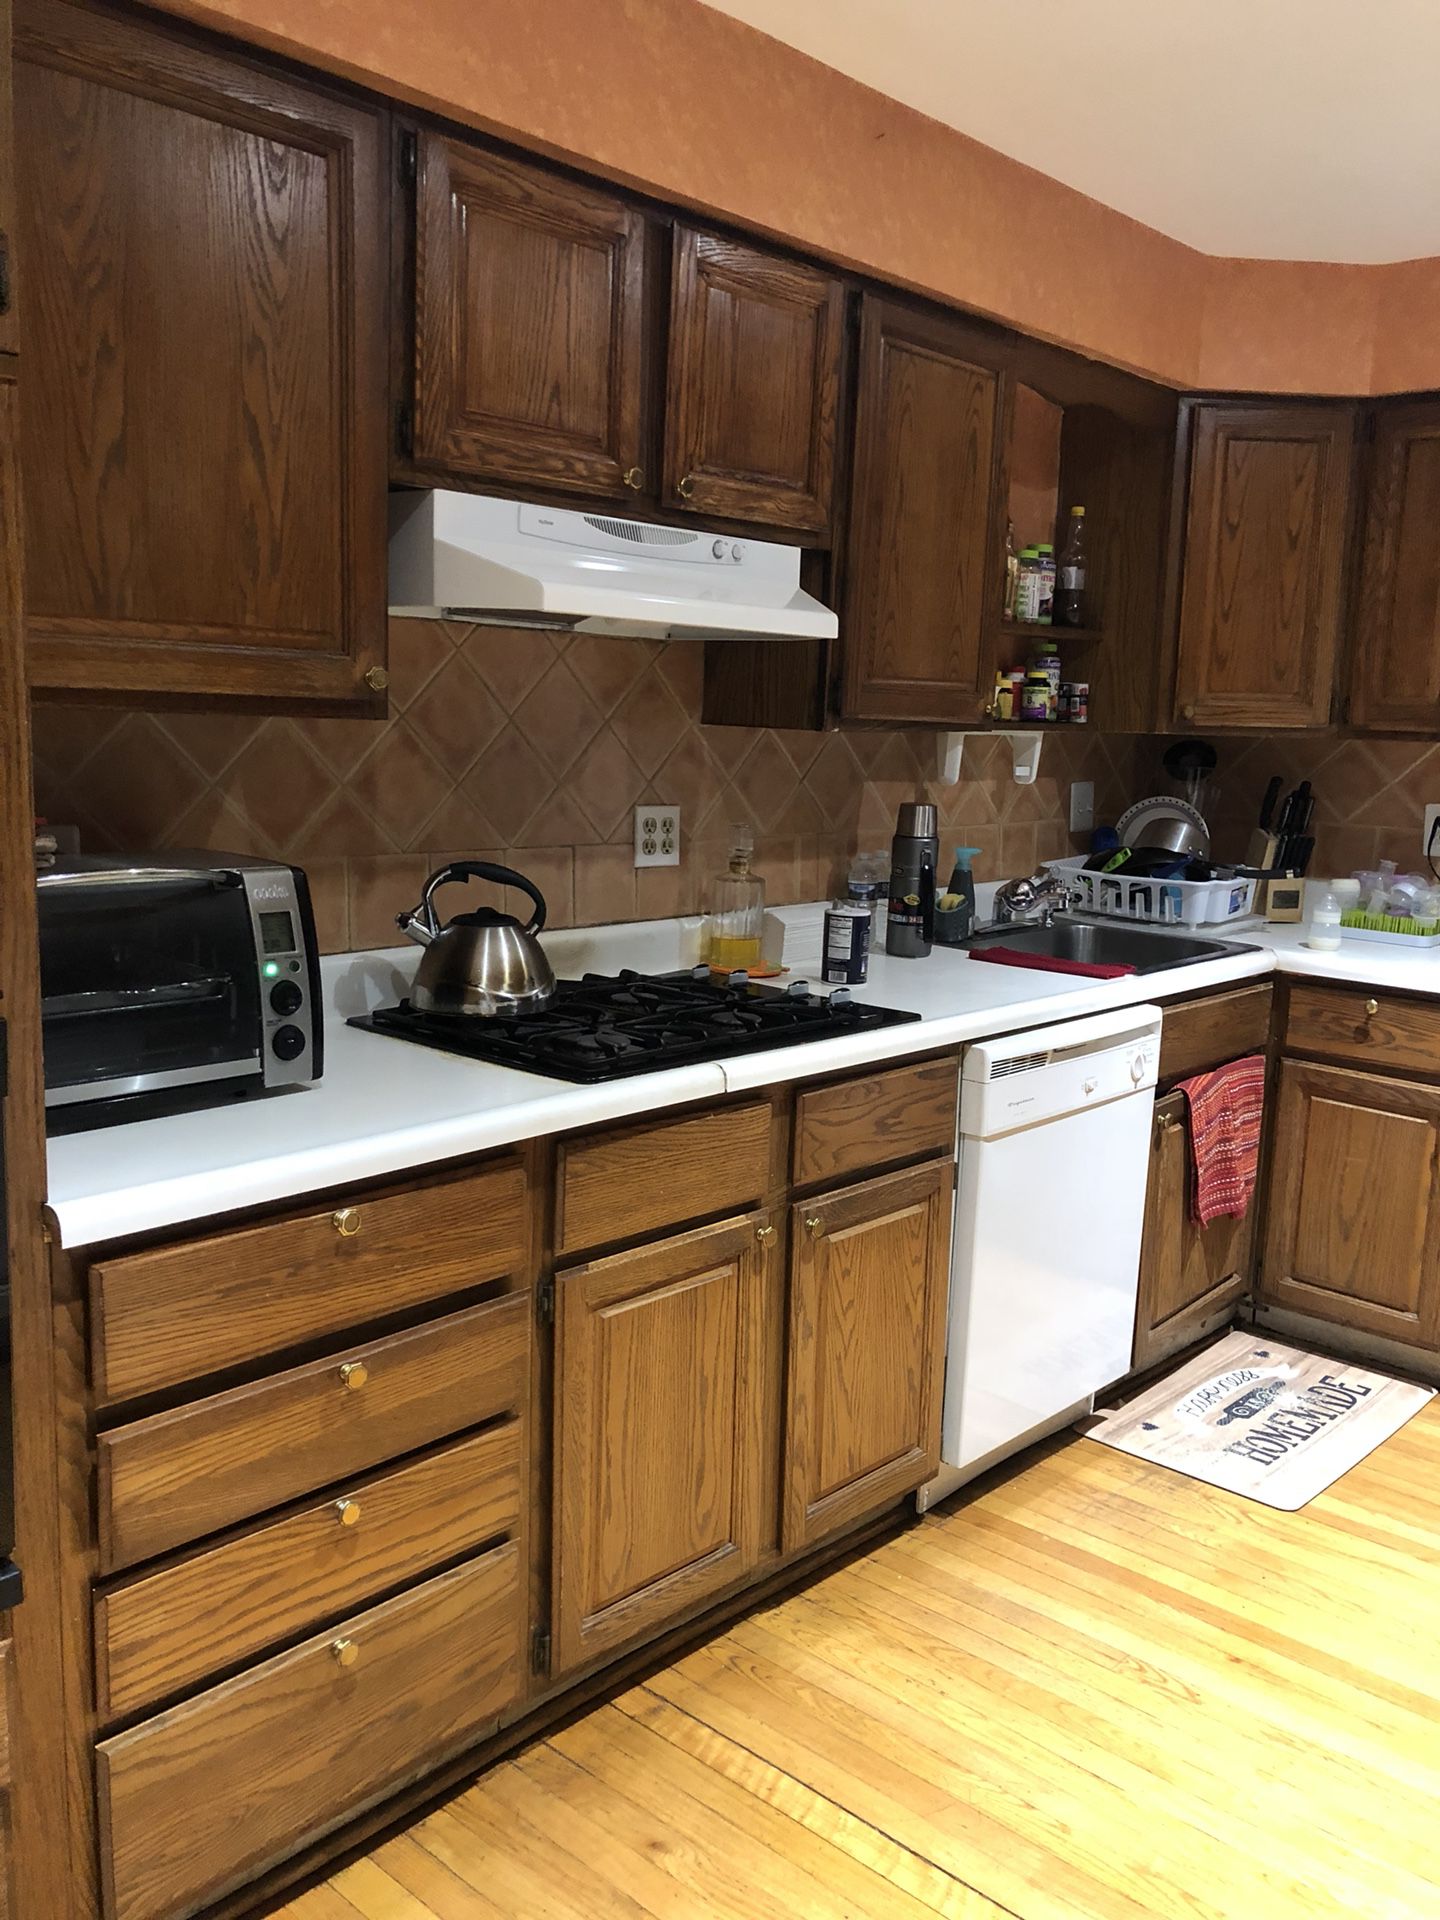 Kitchen Cabinets, oven, microwave, dishwasher, gas stovetop, and hood range